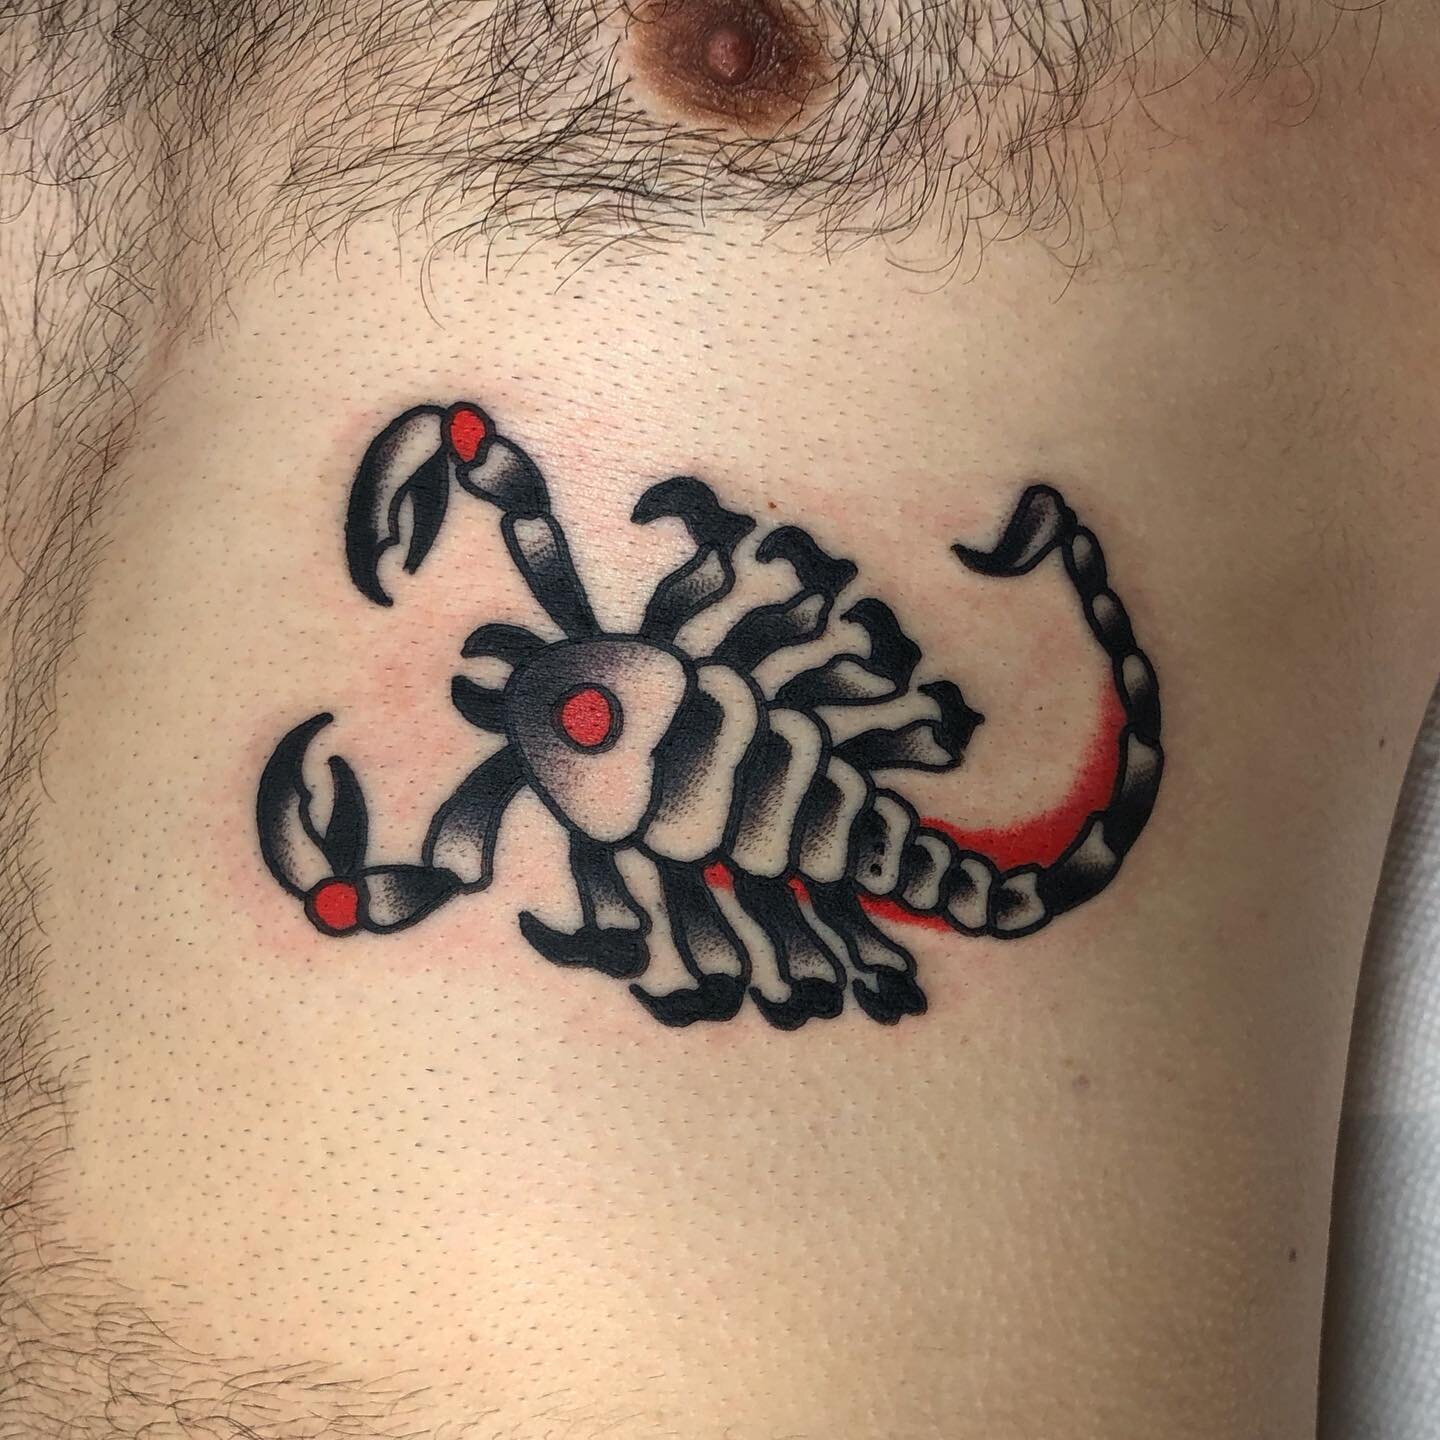 🦂 @riversidetattootn 🦂
DM for the sting stain. Open spots this week!